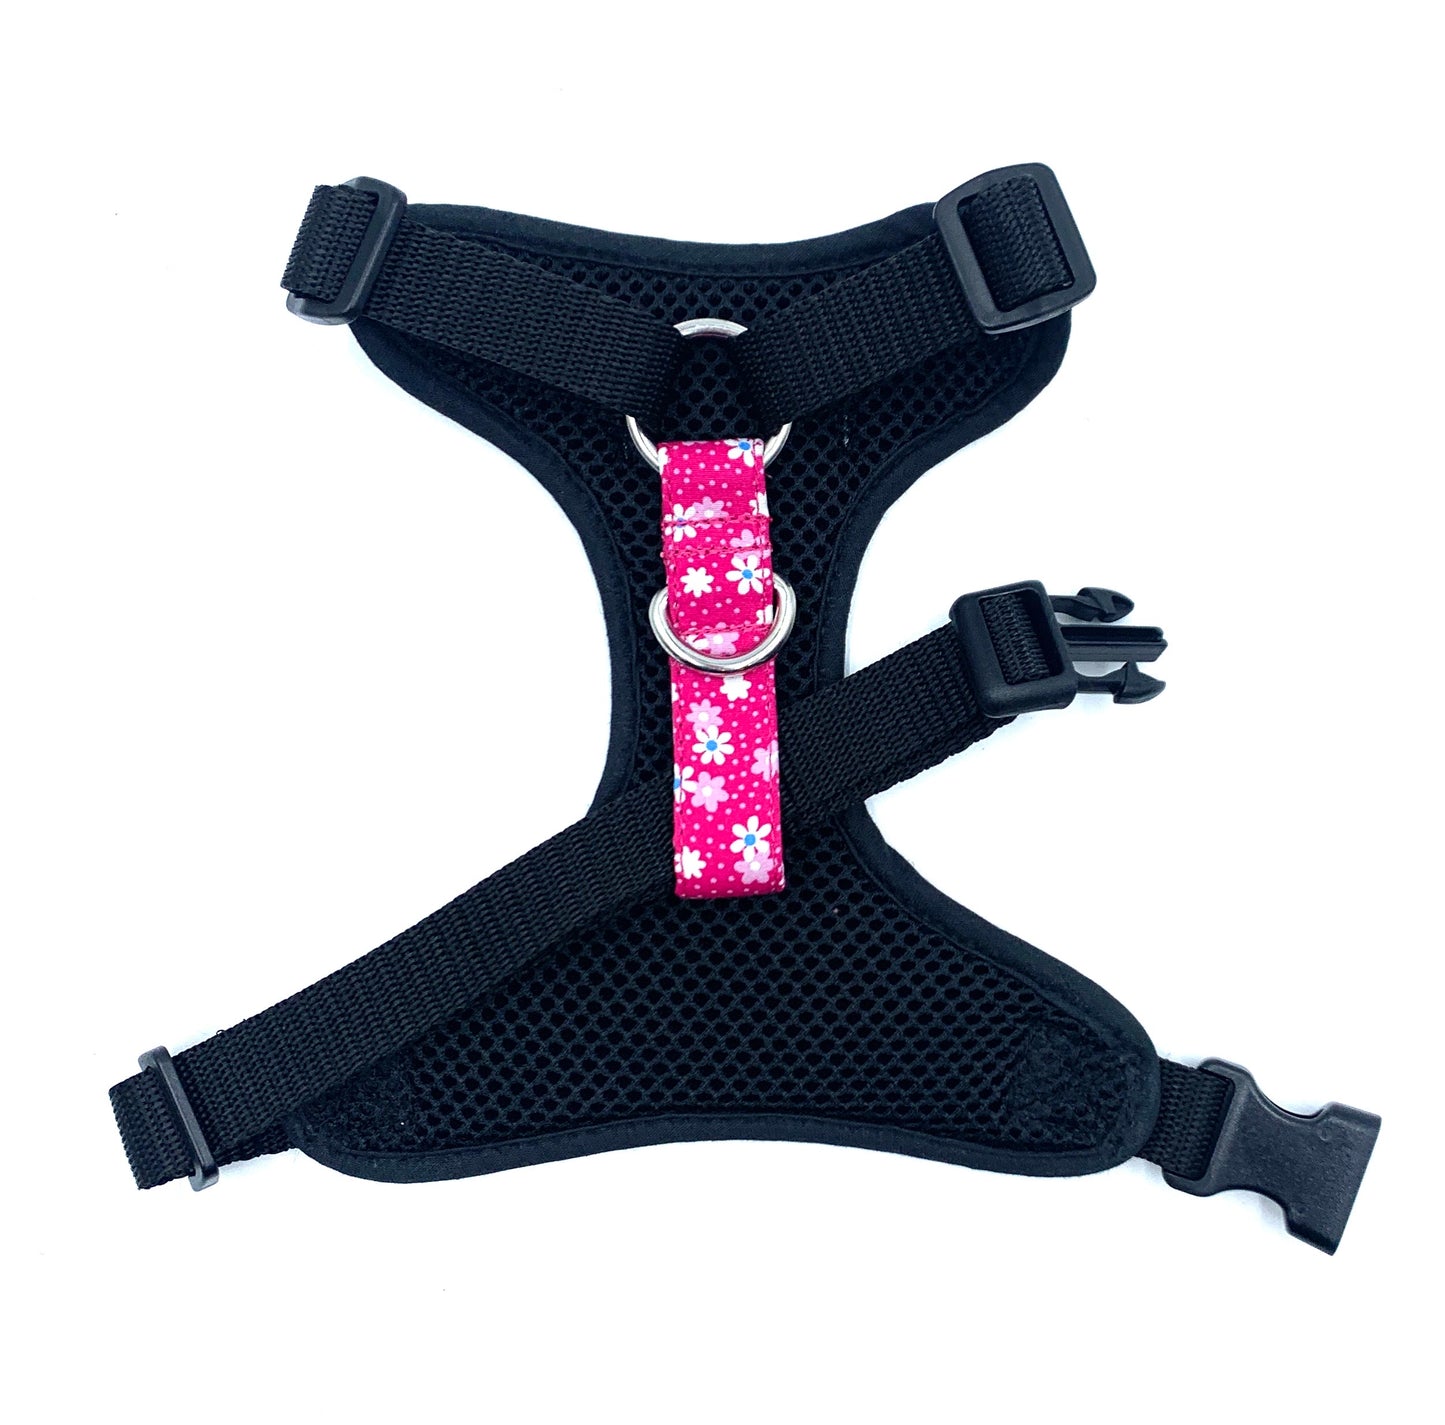 Hot Pink Floral Print Harness